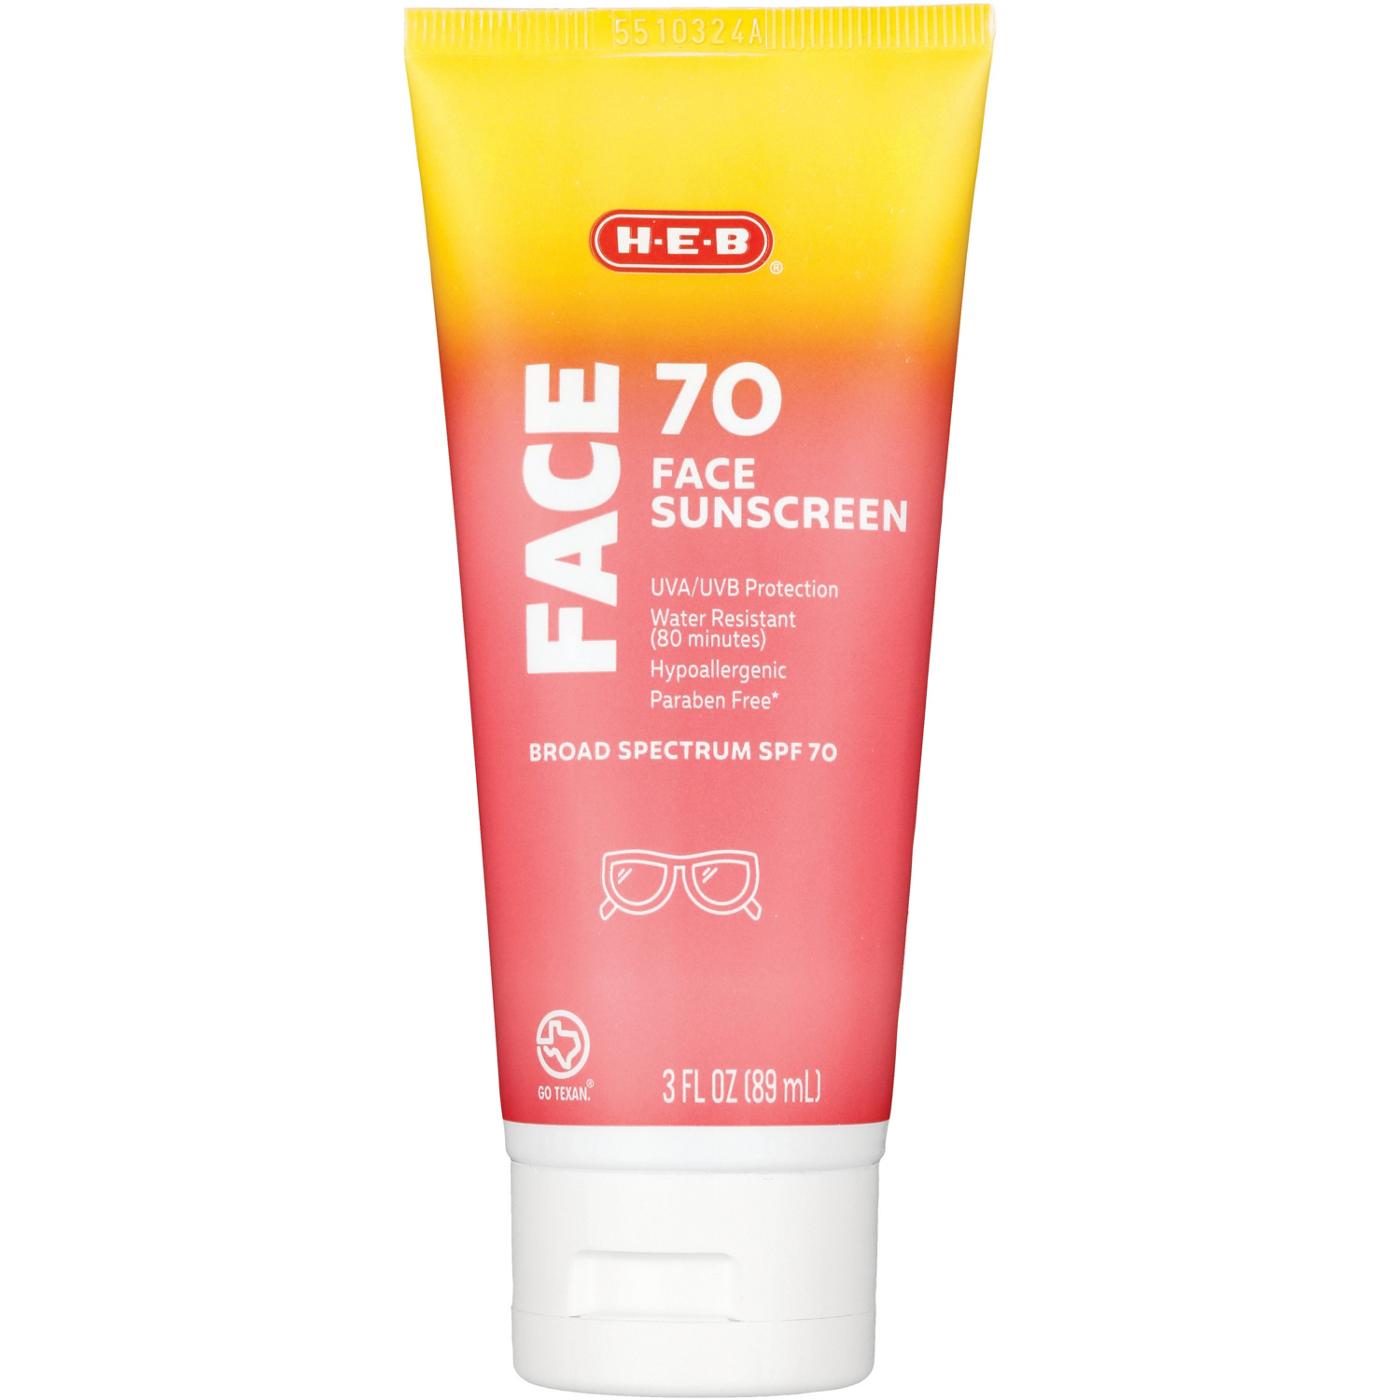 H-E-B Broad Spectrum Sunscreen Face Lotion – SPF 70; image 1 of 3